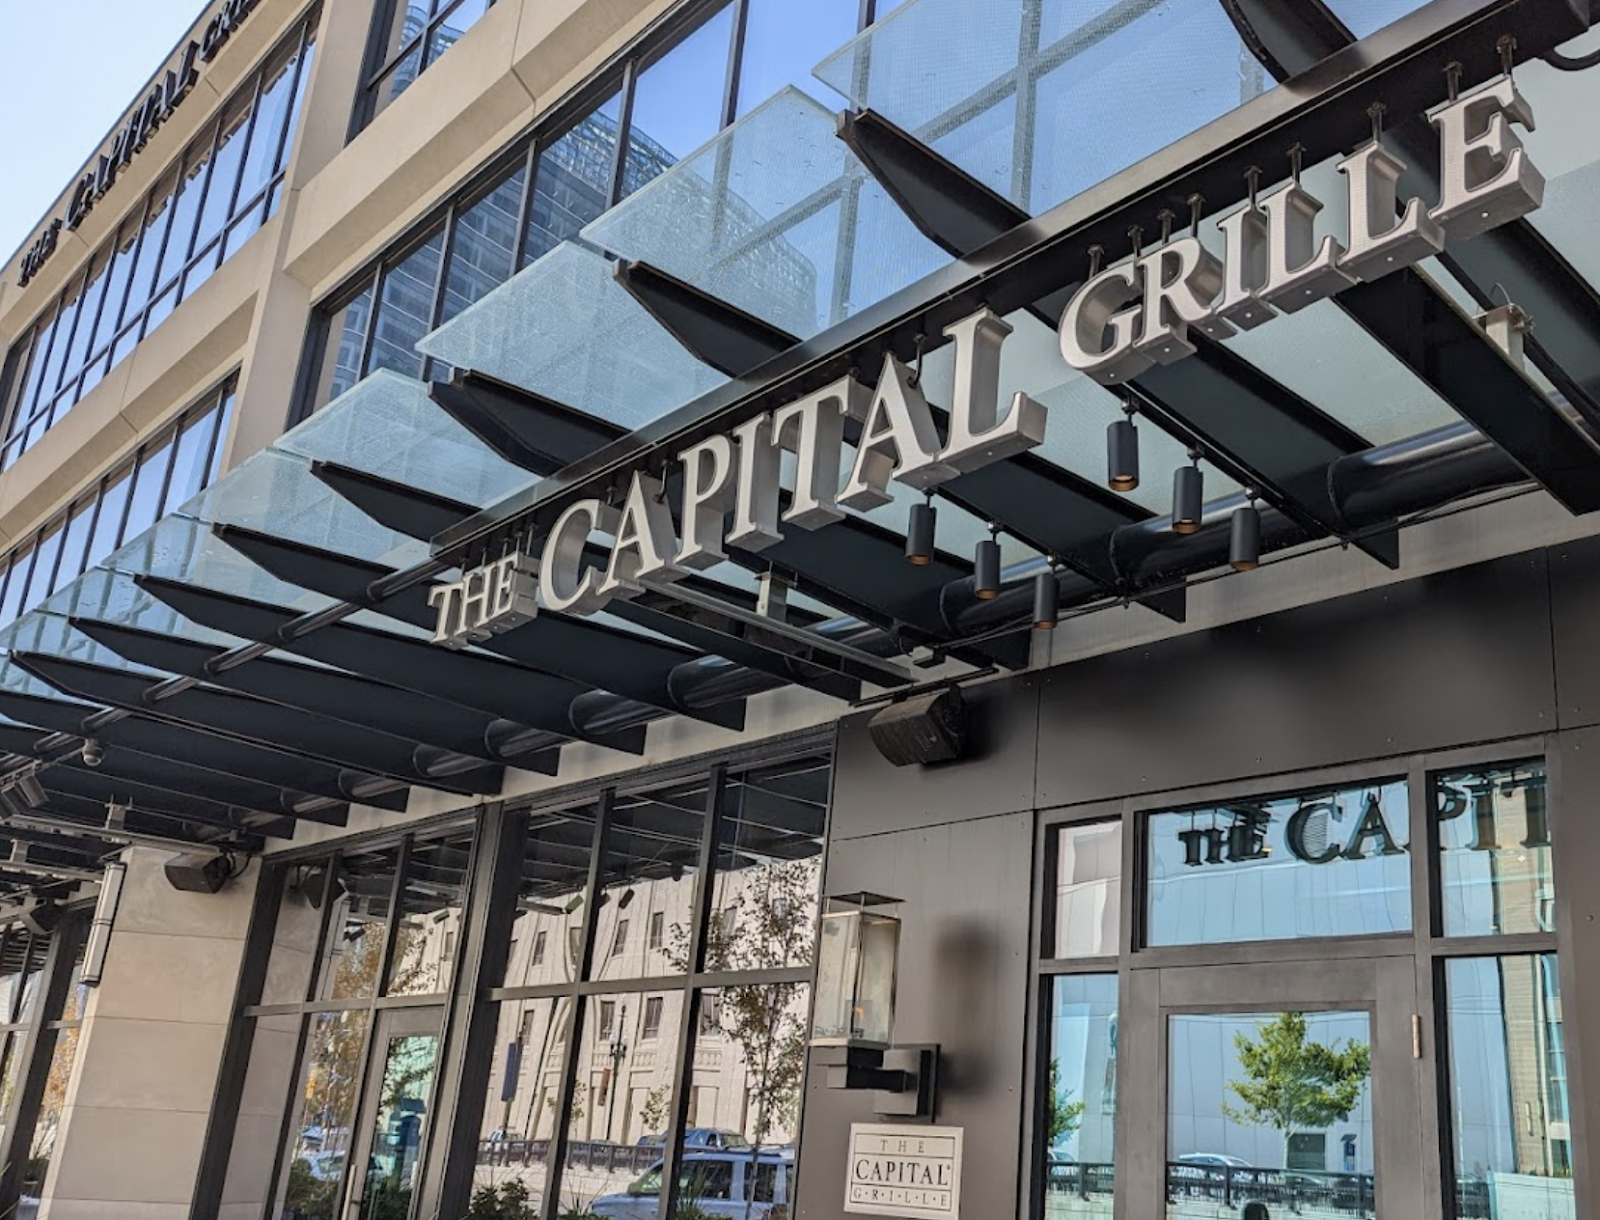 The front door entrance to The Capital Grille in Salt Lake City, Utah.